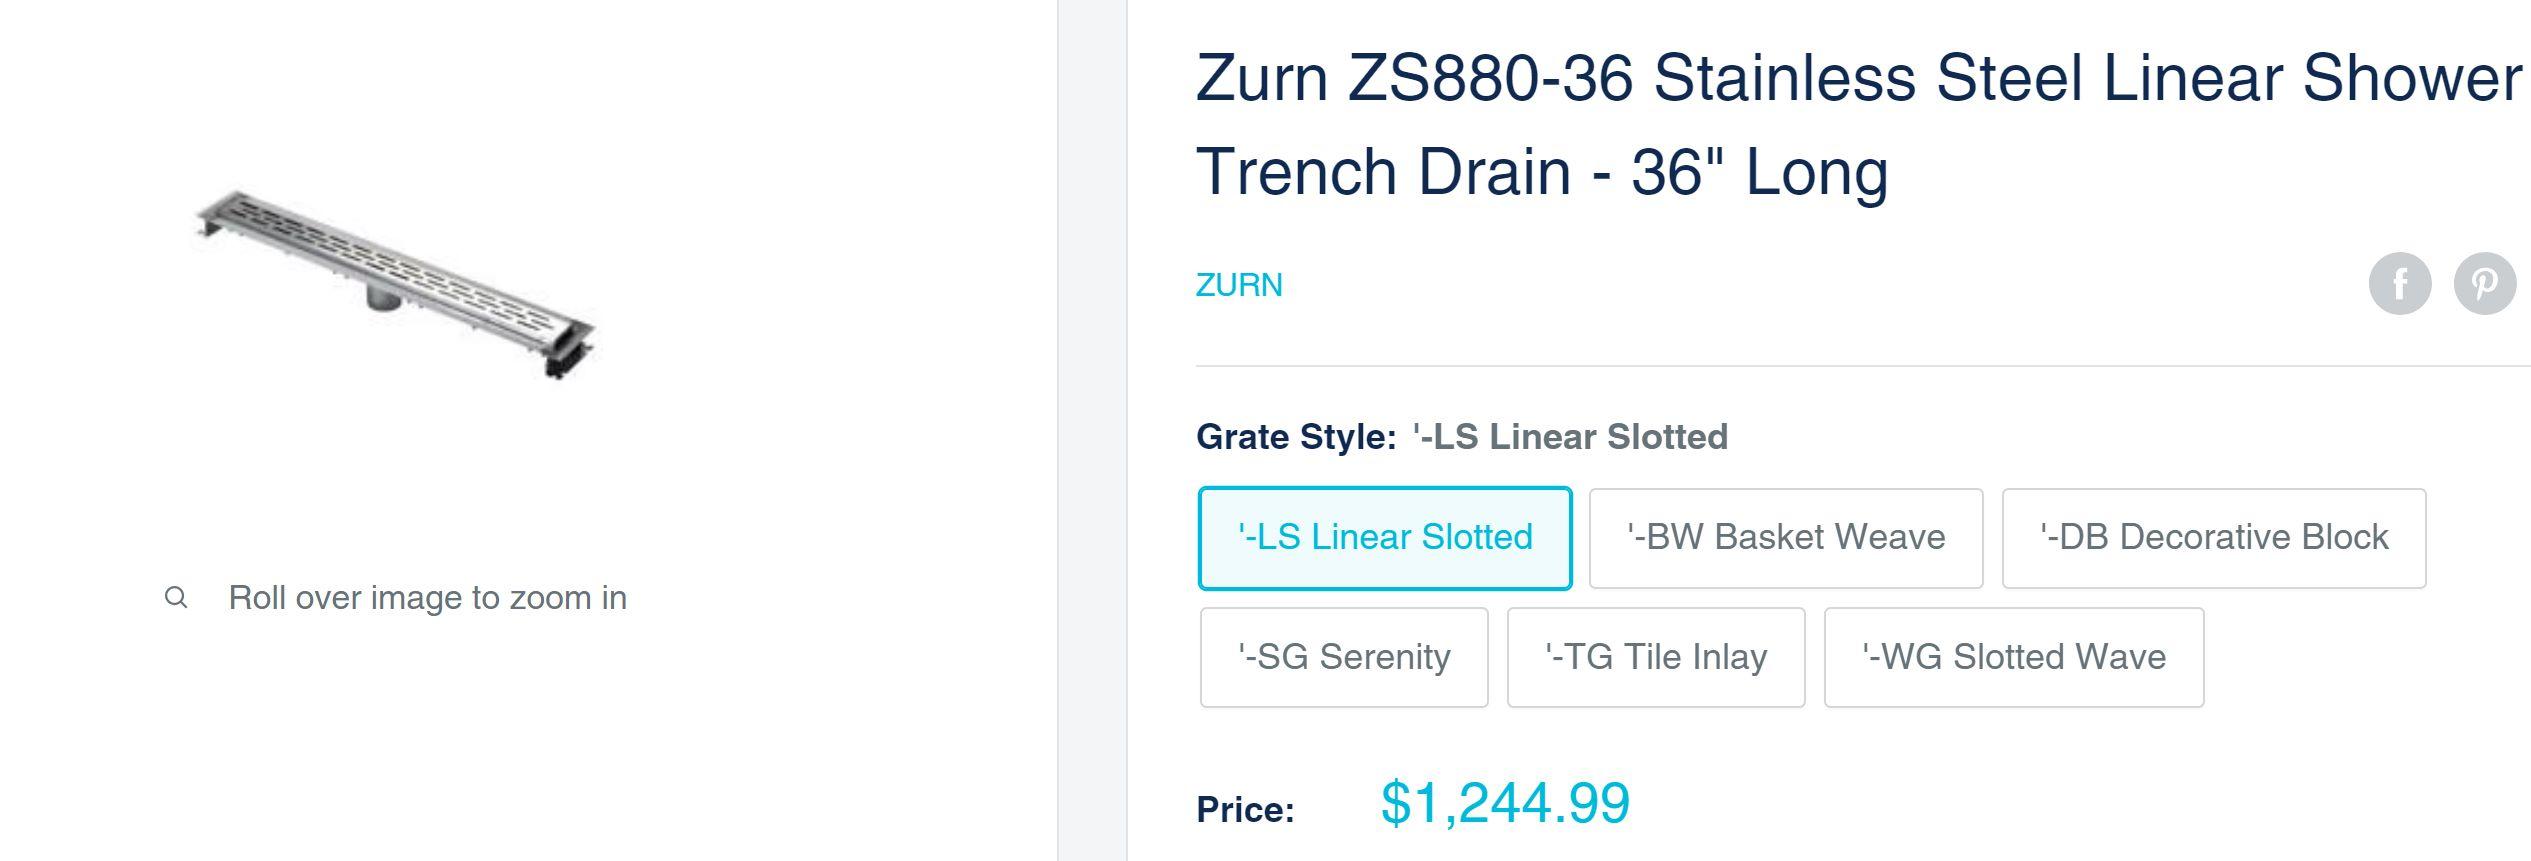 (12) ZURN  ZS880 STAINLESS STEEL LINEAR SHOWER DRAIN MODEL# PS8880-ASY-L/GRT-36